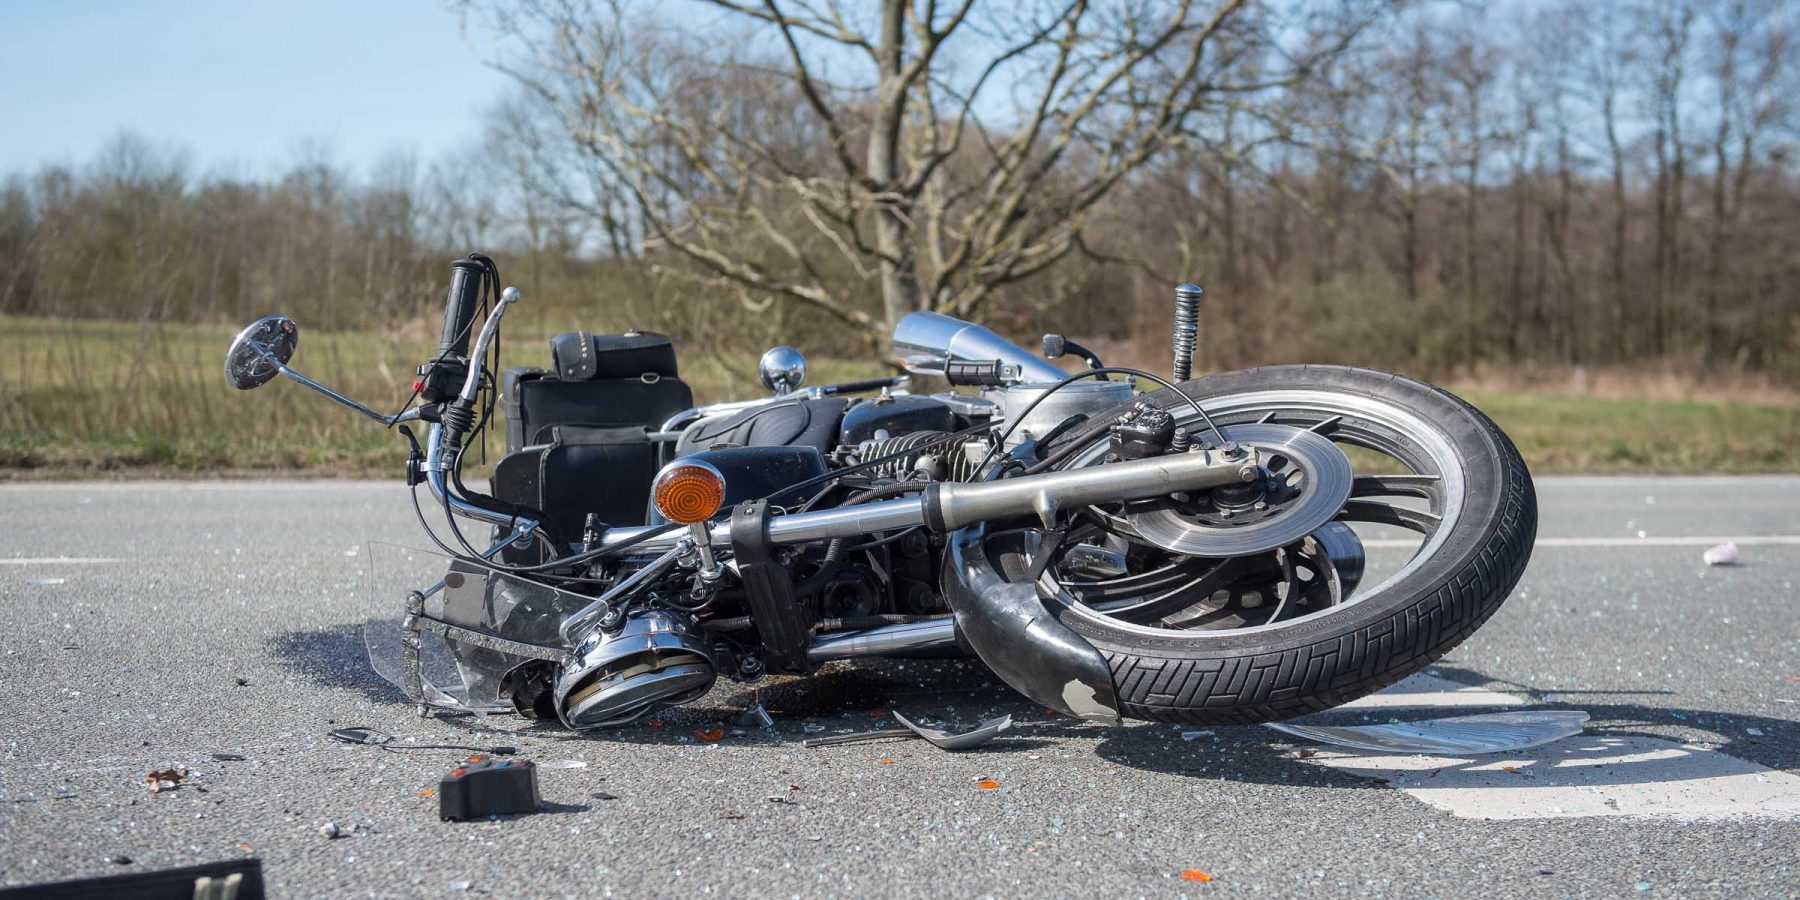 Motorcycle Lawyer & Bicycle Accident | FAQ